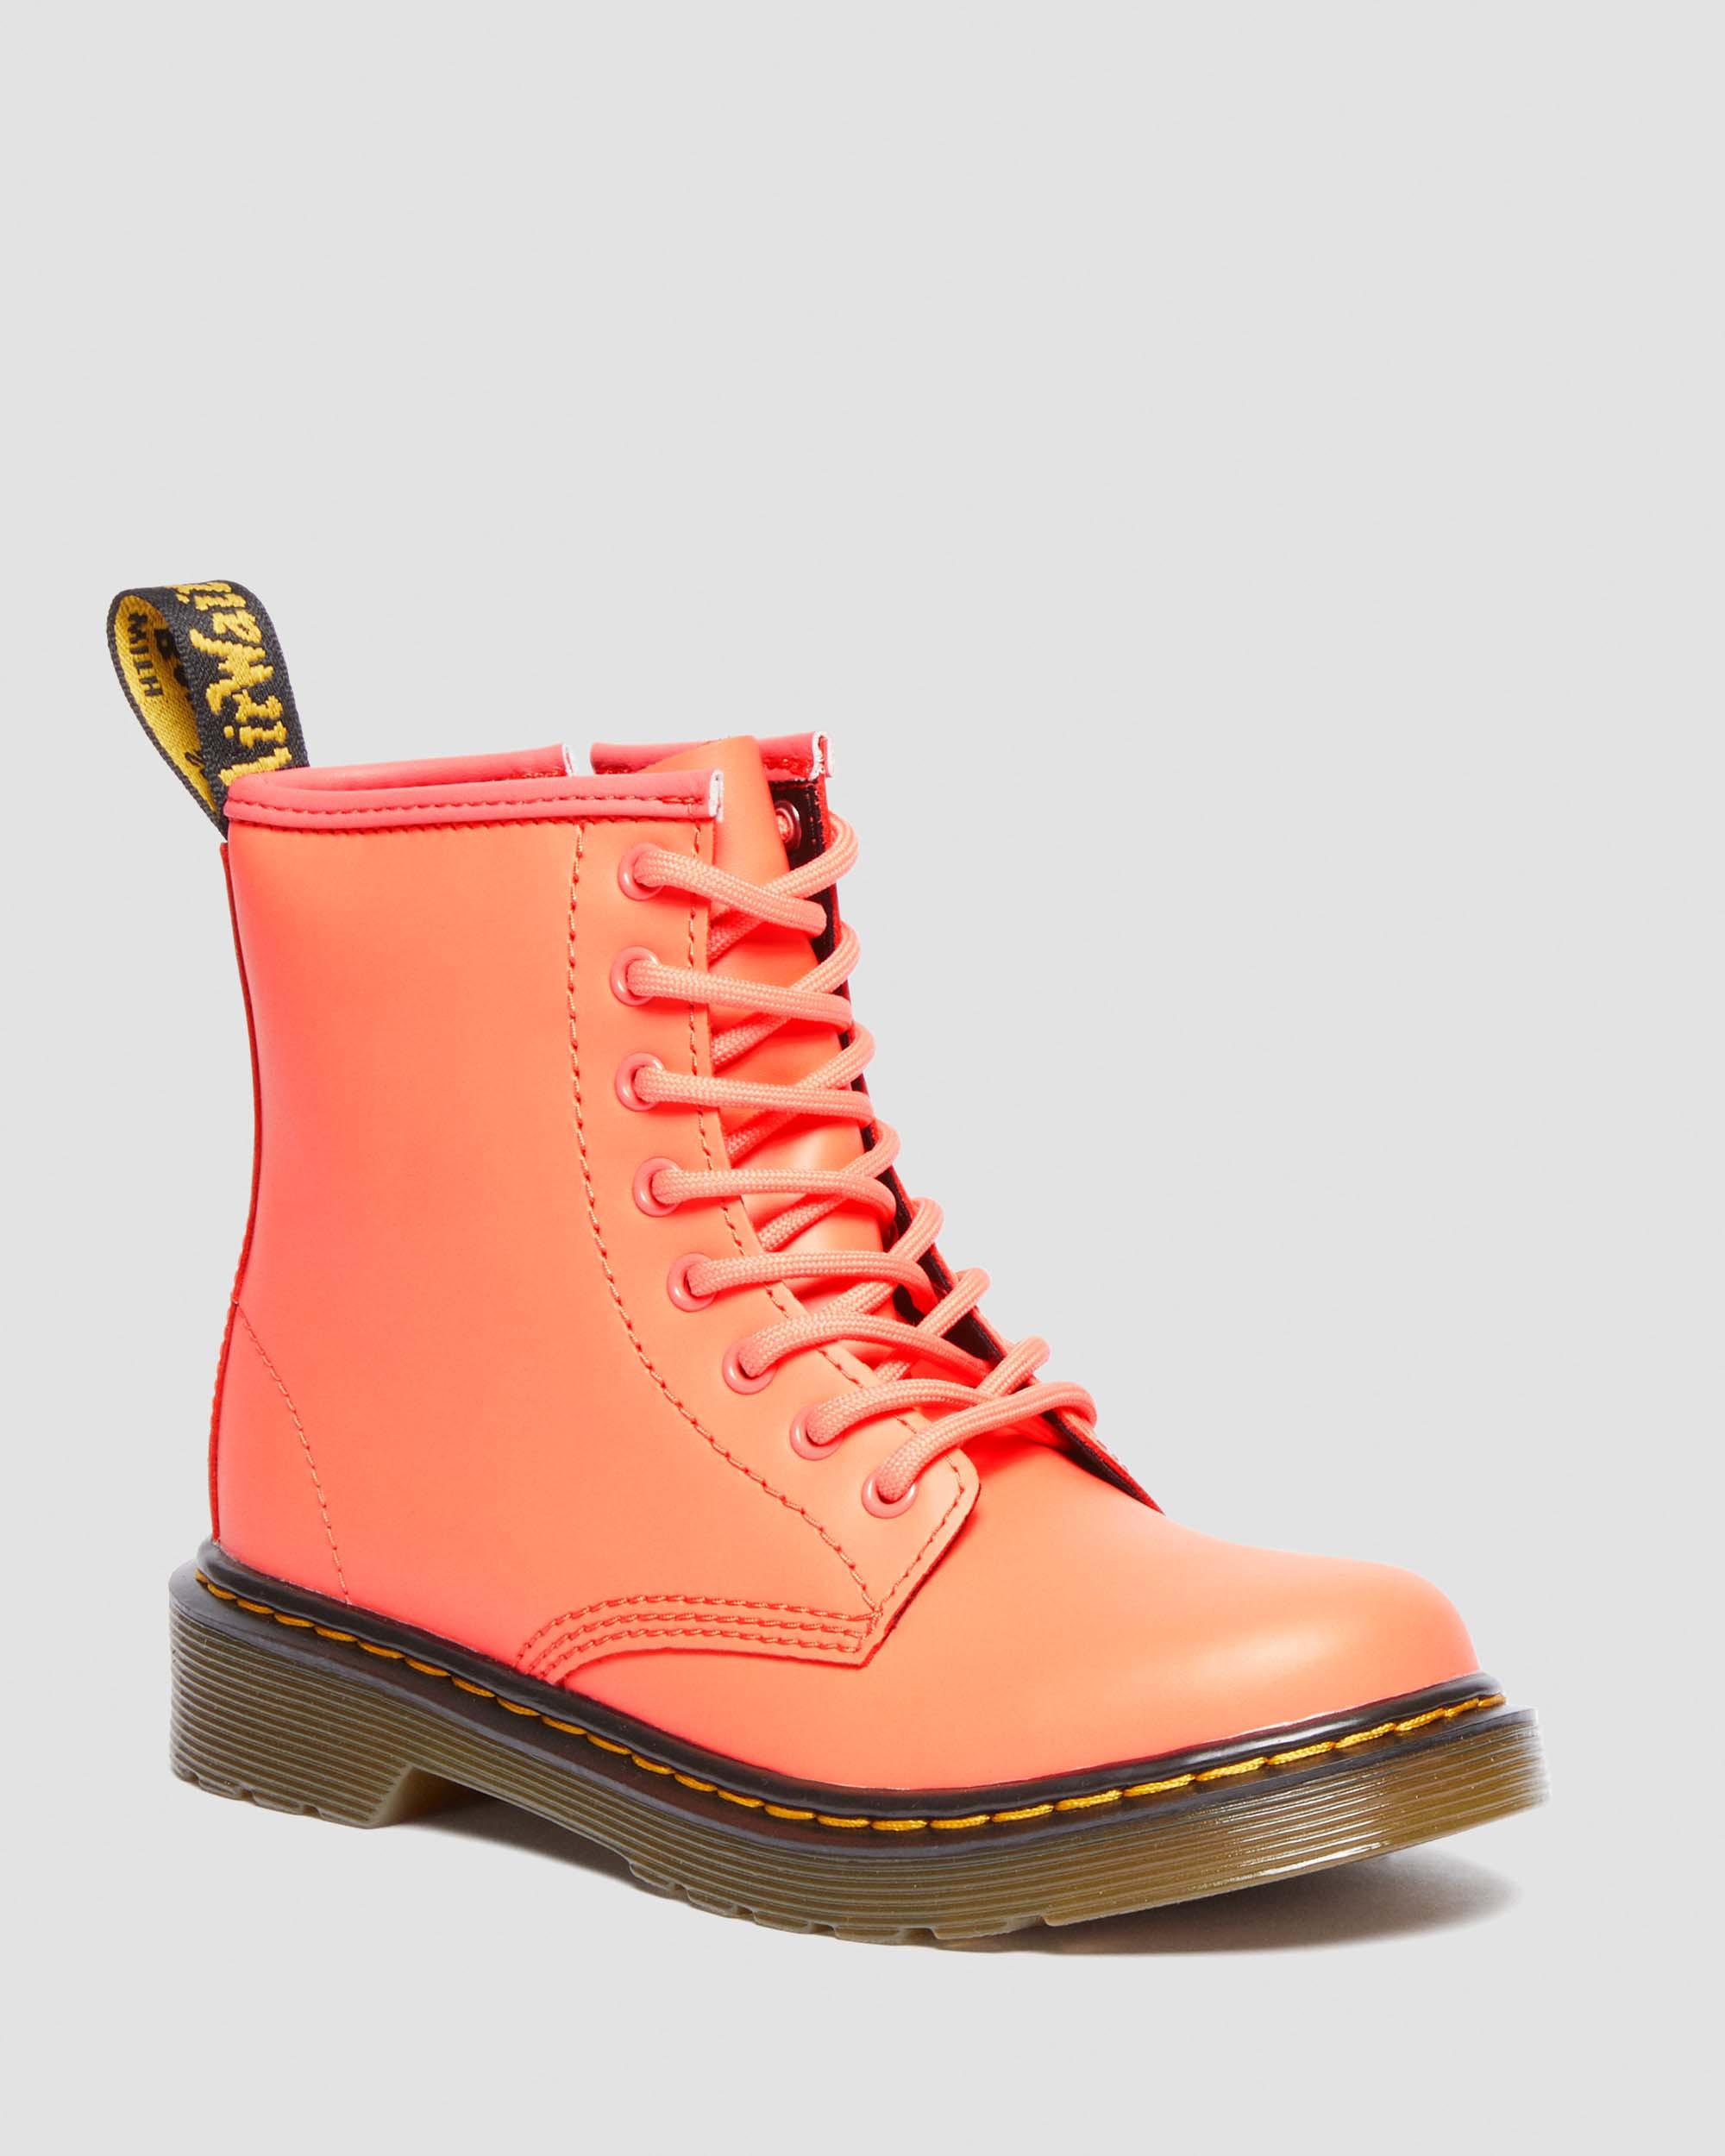 Junior 1460 Softy T Leather Lace Up Boots, Coral | Dr. Martens